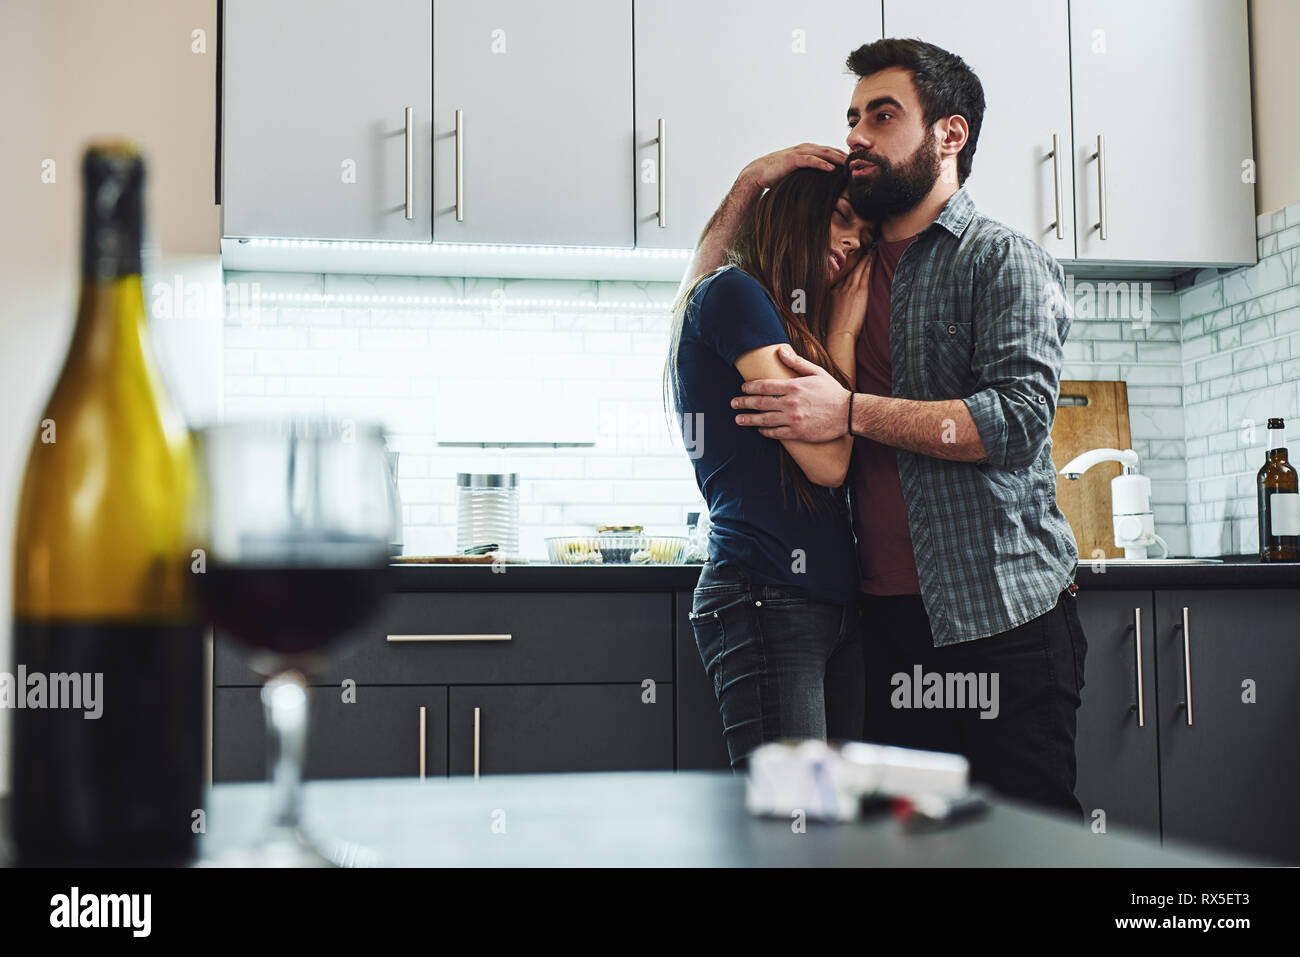 Couple of drunkards standing in the kitchen. Man hugging his drunk wife, she is almost sleeping. A bottle and a glass of red wine standing on the tabl Stock Photo